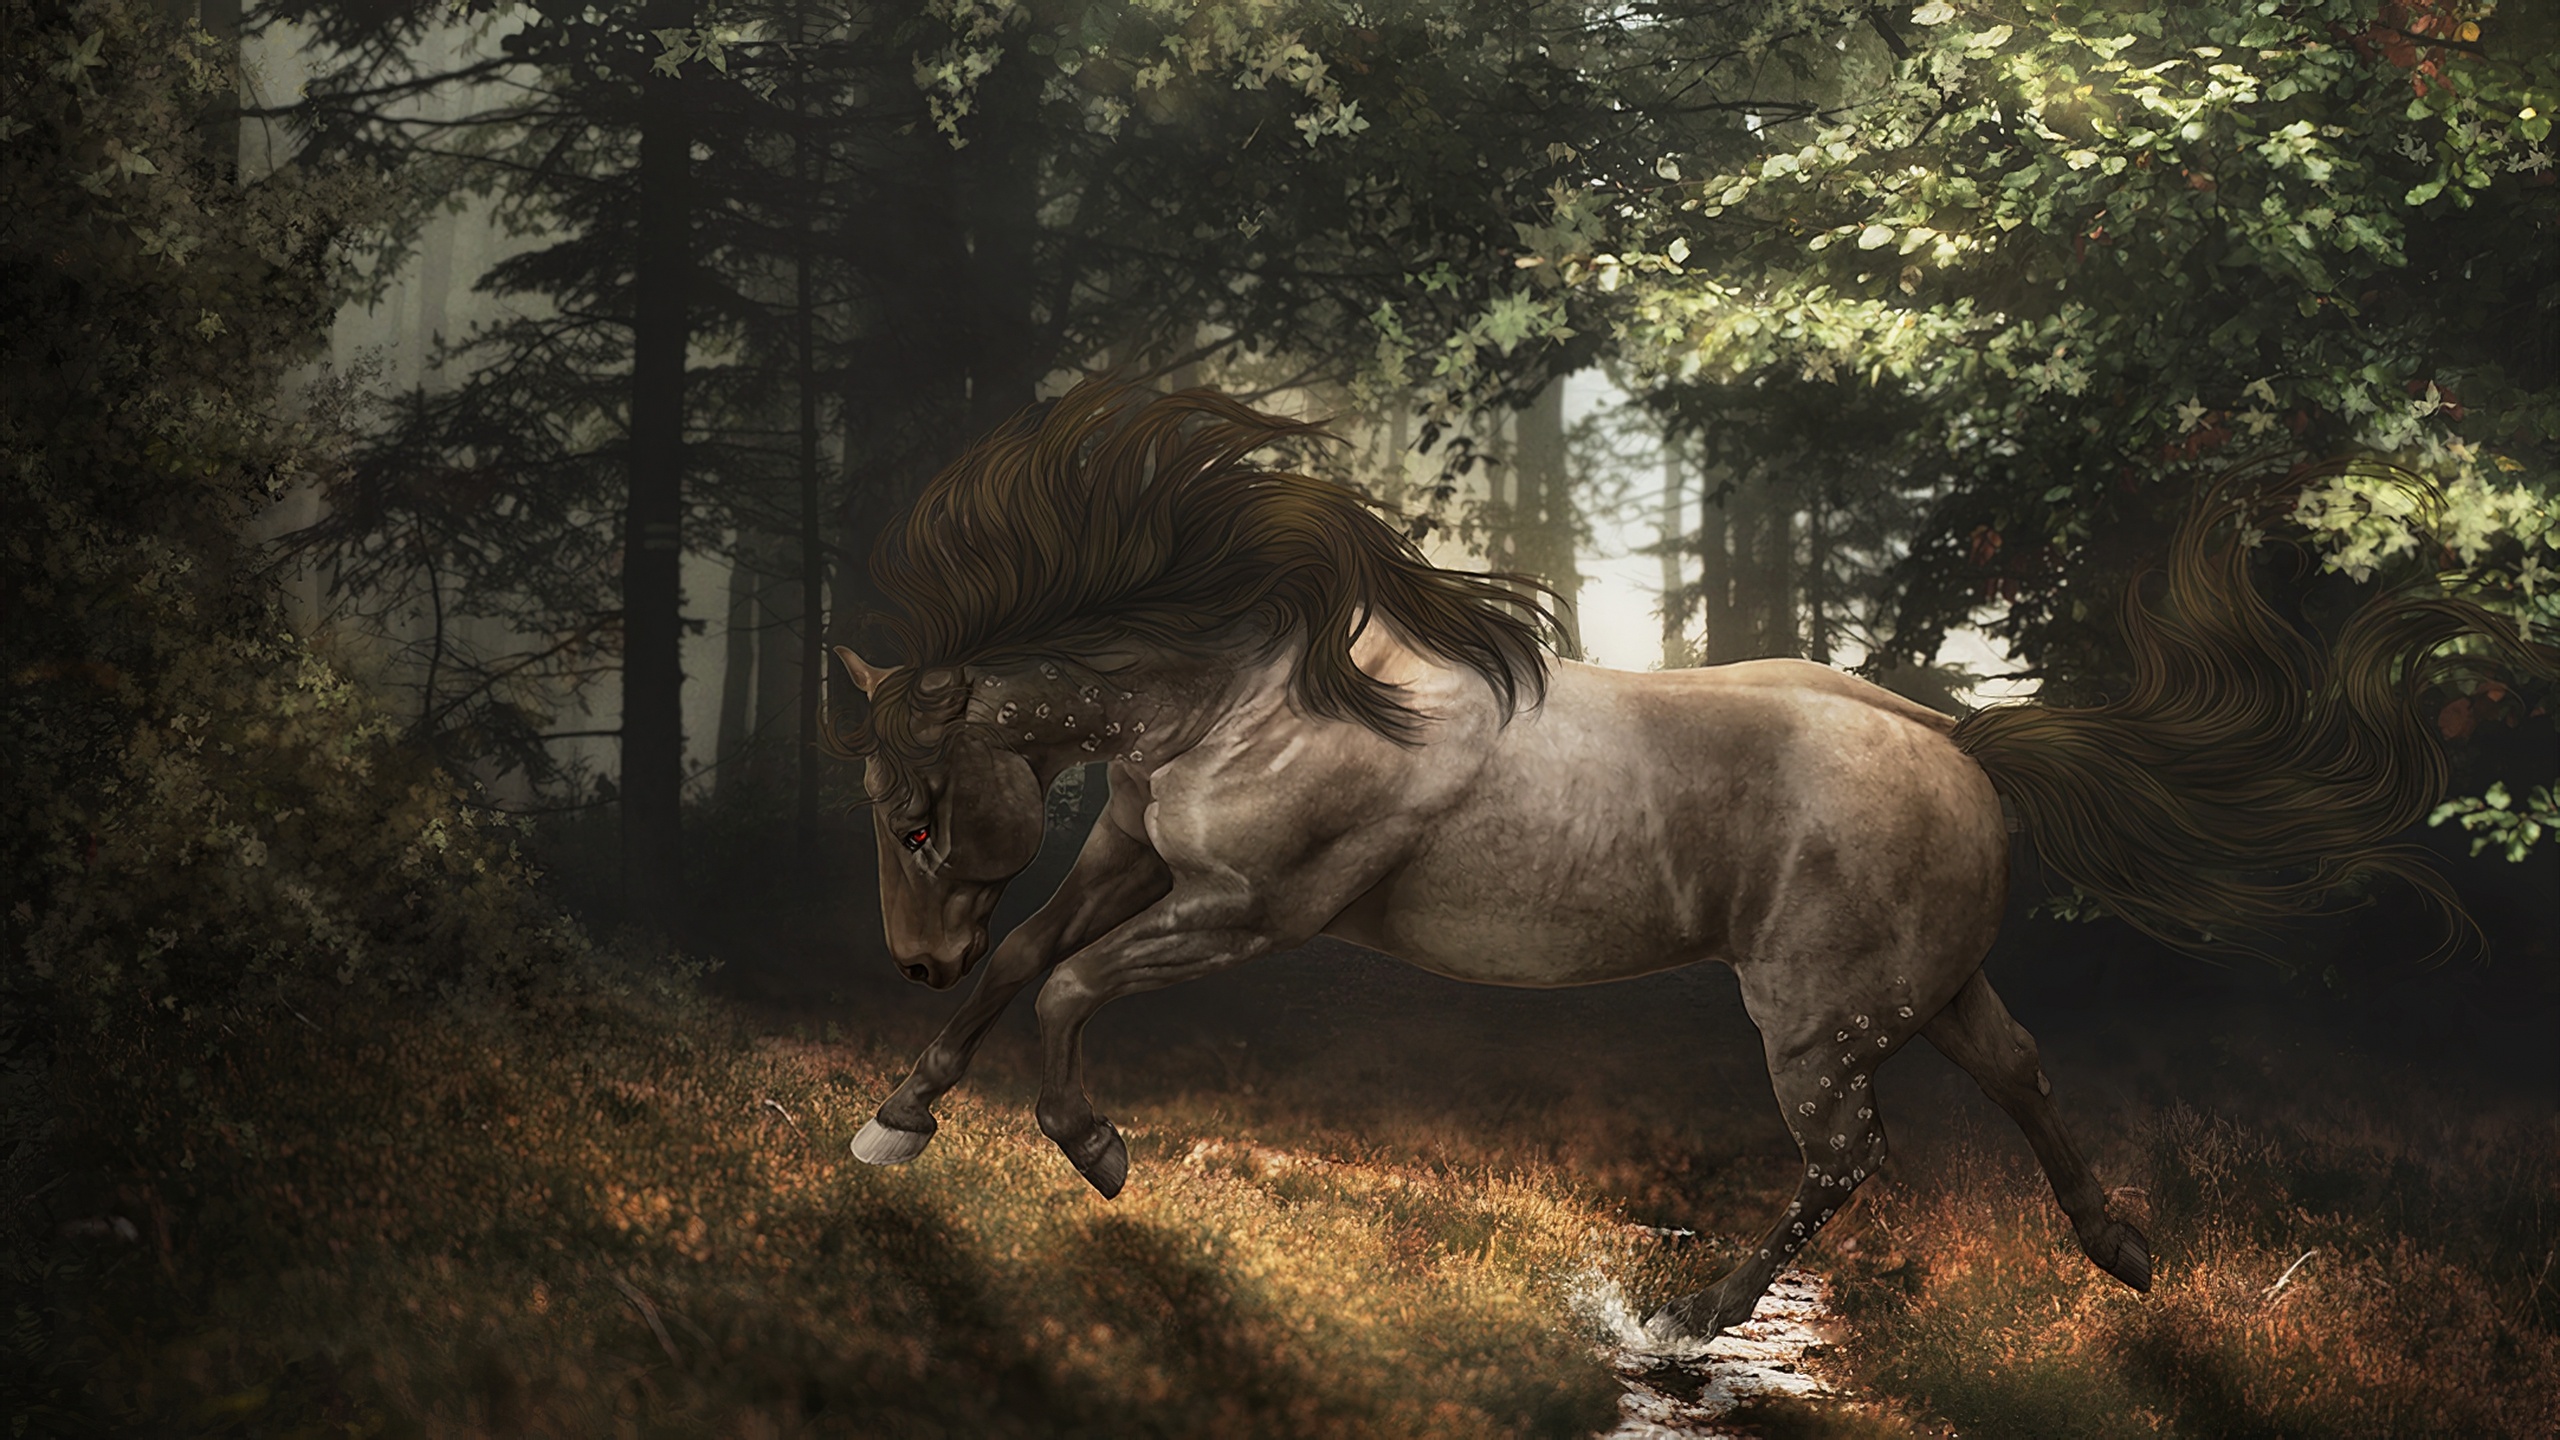 General 2560x1440 nature forest horse daylight artwork